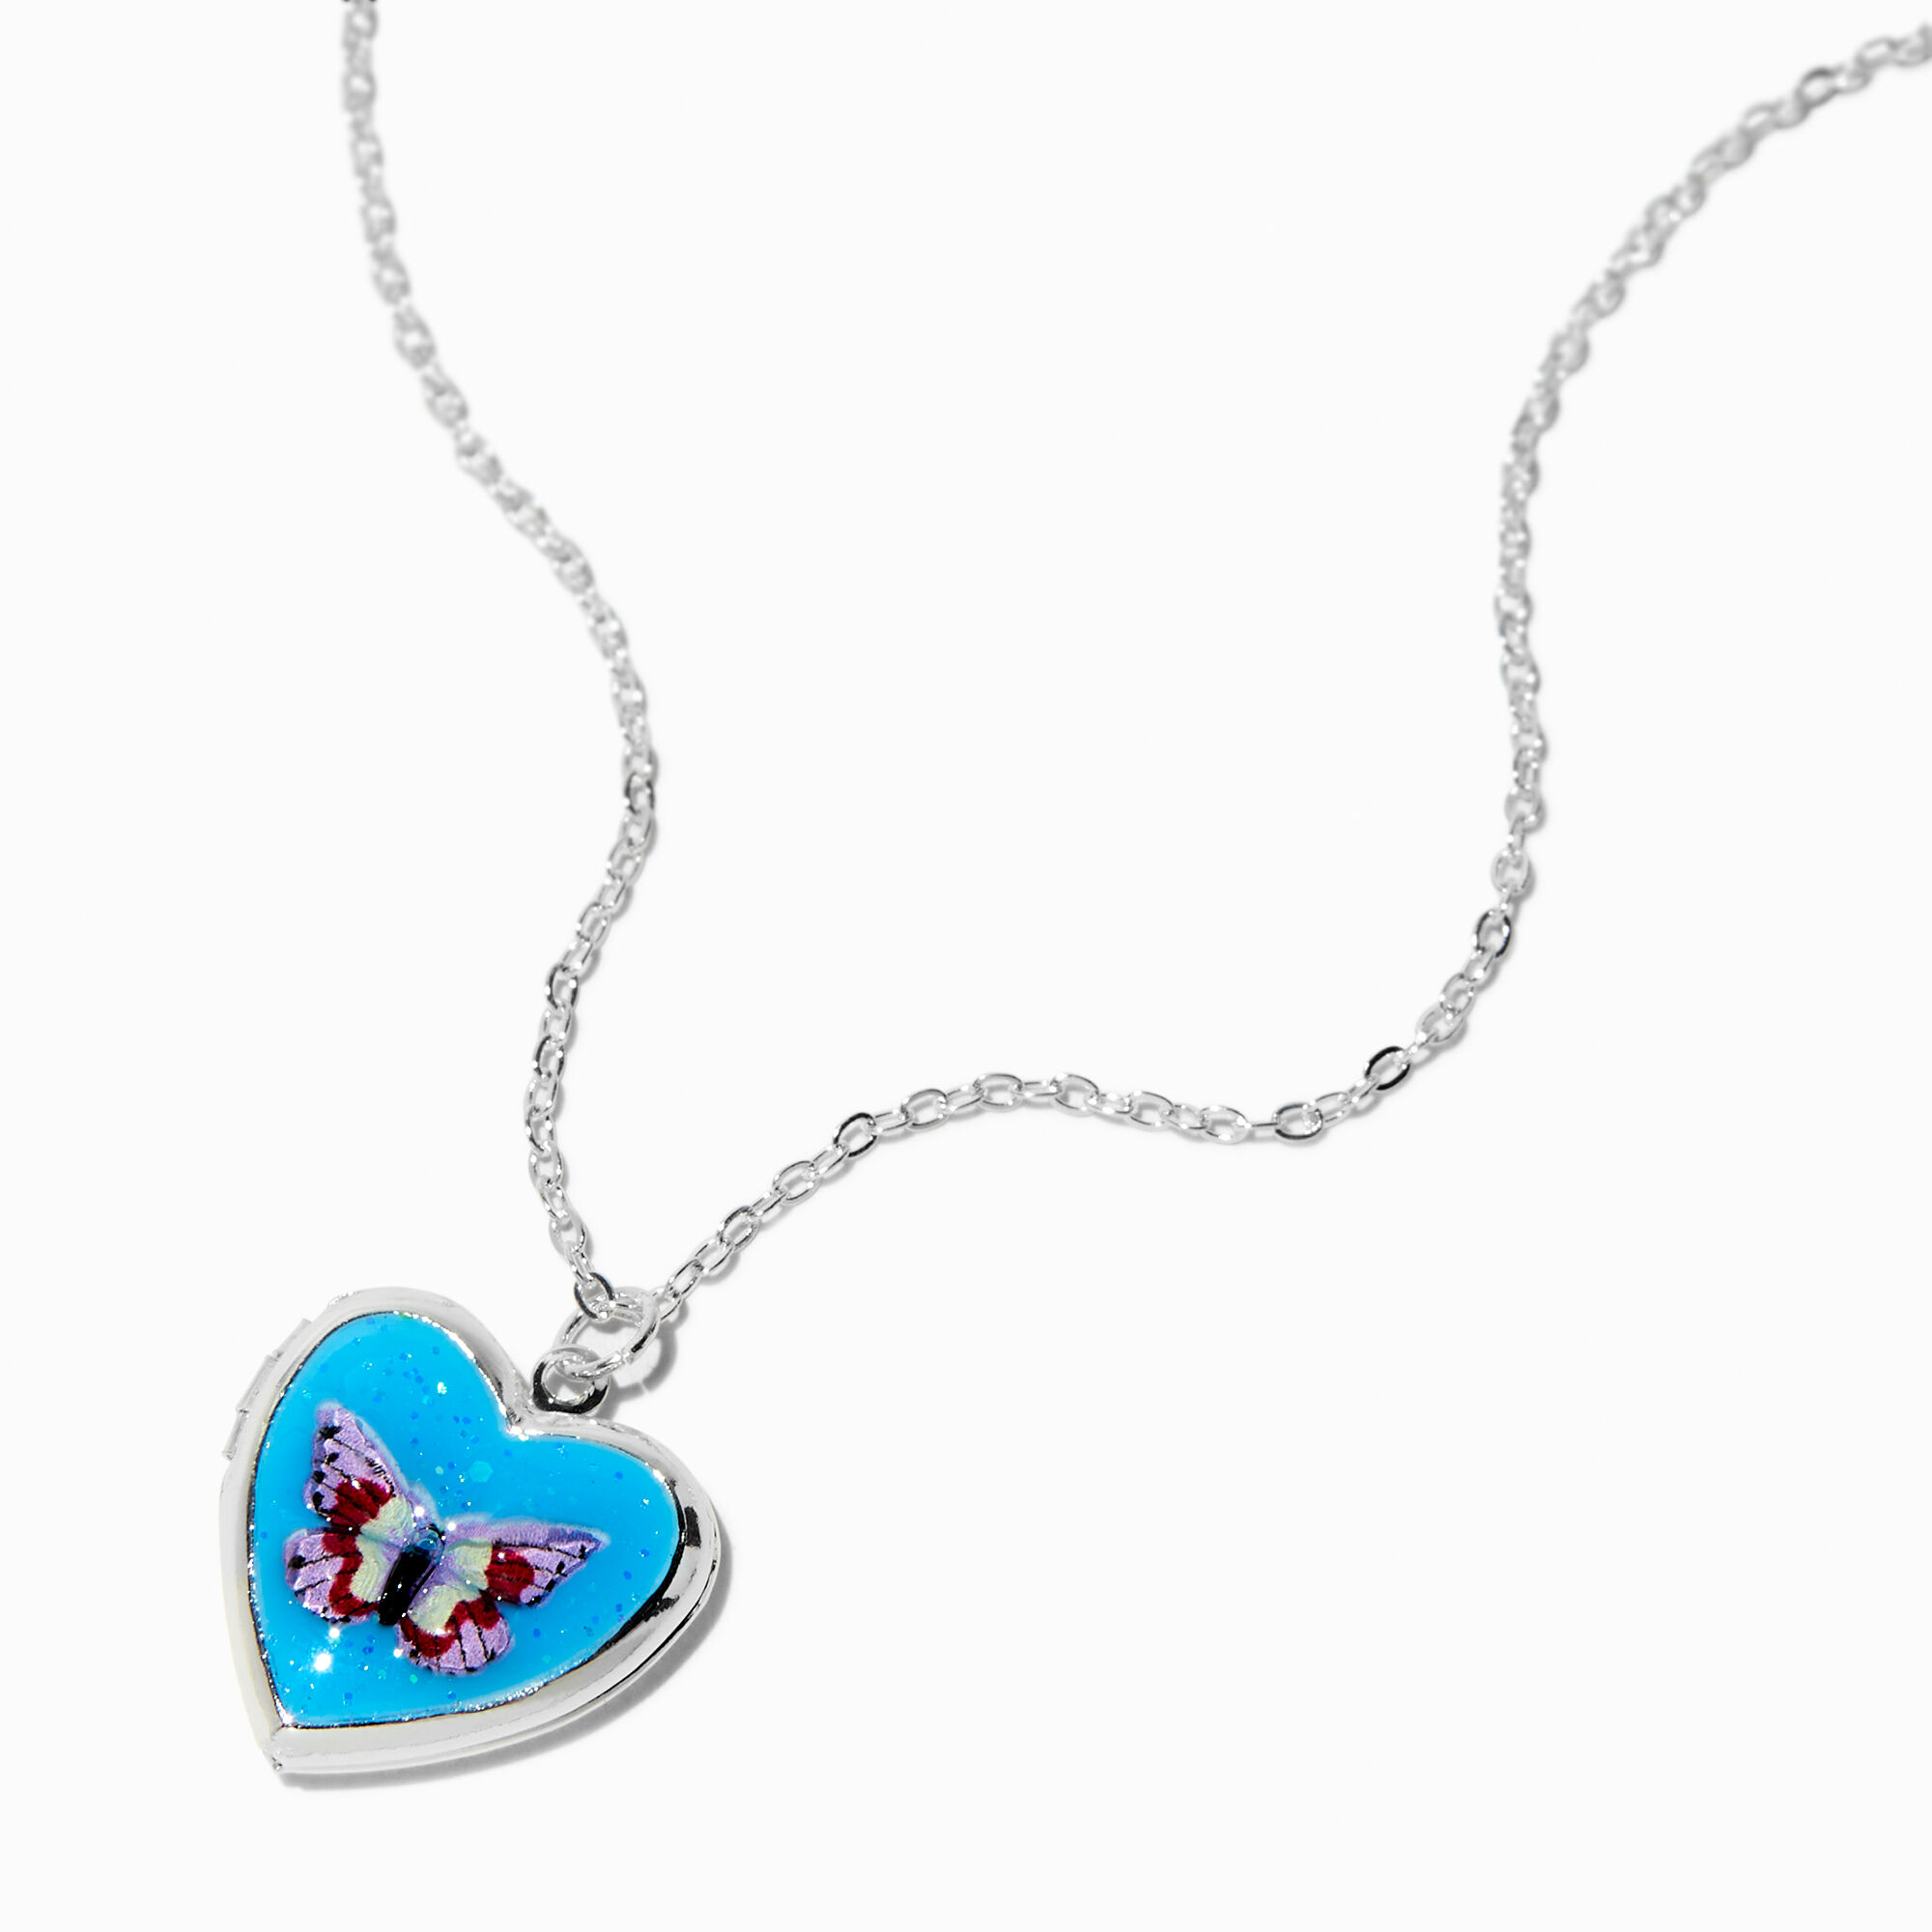 View Claires SilverTone Glitter Butterfly Locket Pendant Necklace Blue information